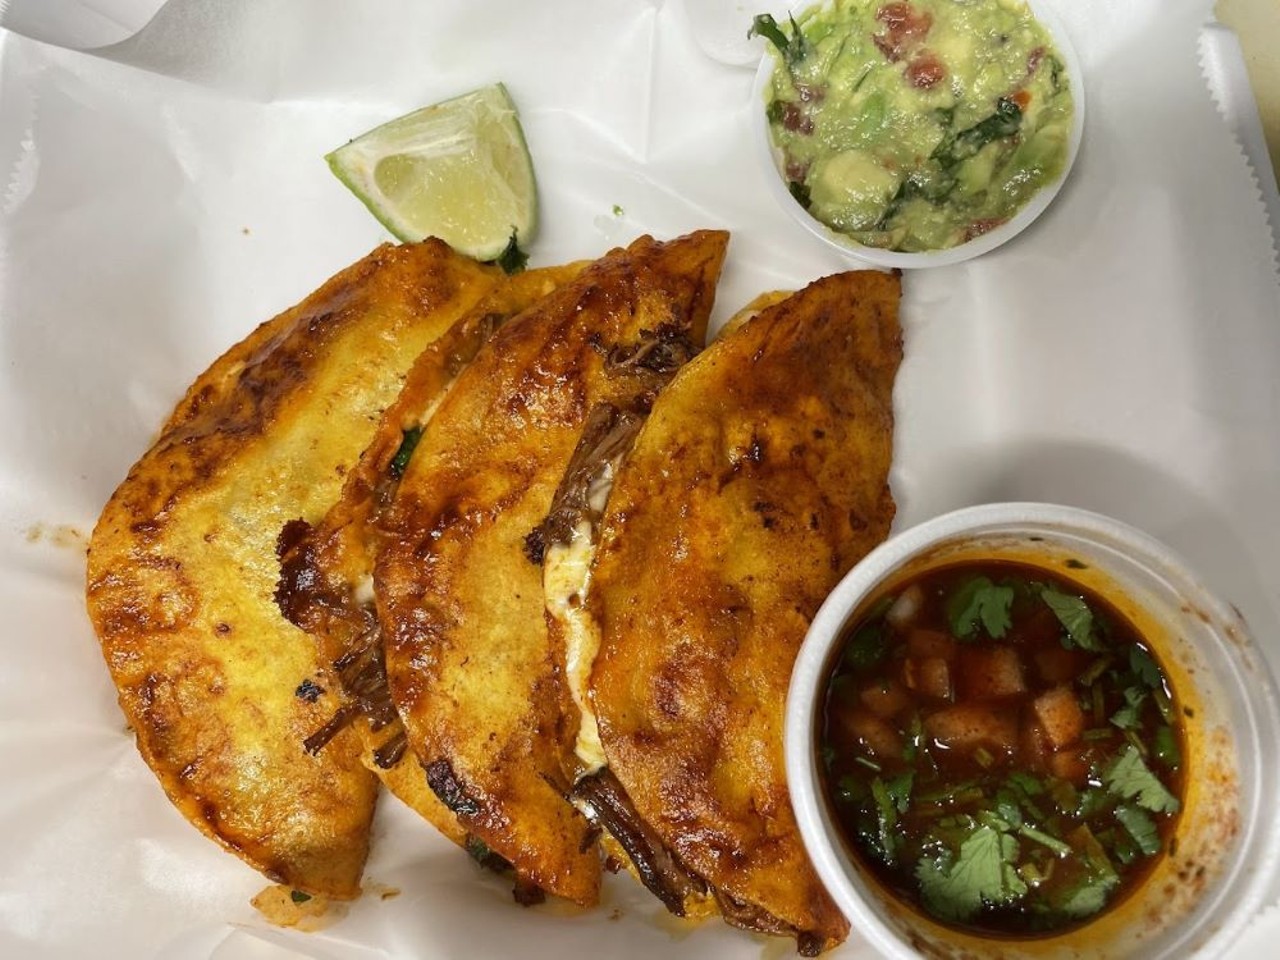 La Taqueria El Nopal 
8307 N Dale Mabry Hwy., Tampa, 813-679-8609
Whether you’re depositing funds at the PNC Bank or getting an oil change at the Jiffy Lube, reward yourself for adulting with a sope, quesadilla, or nopales.
Photo via La Taqueria El Nopal/Google